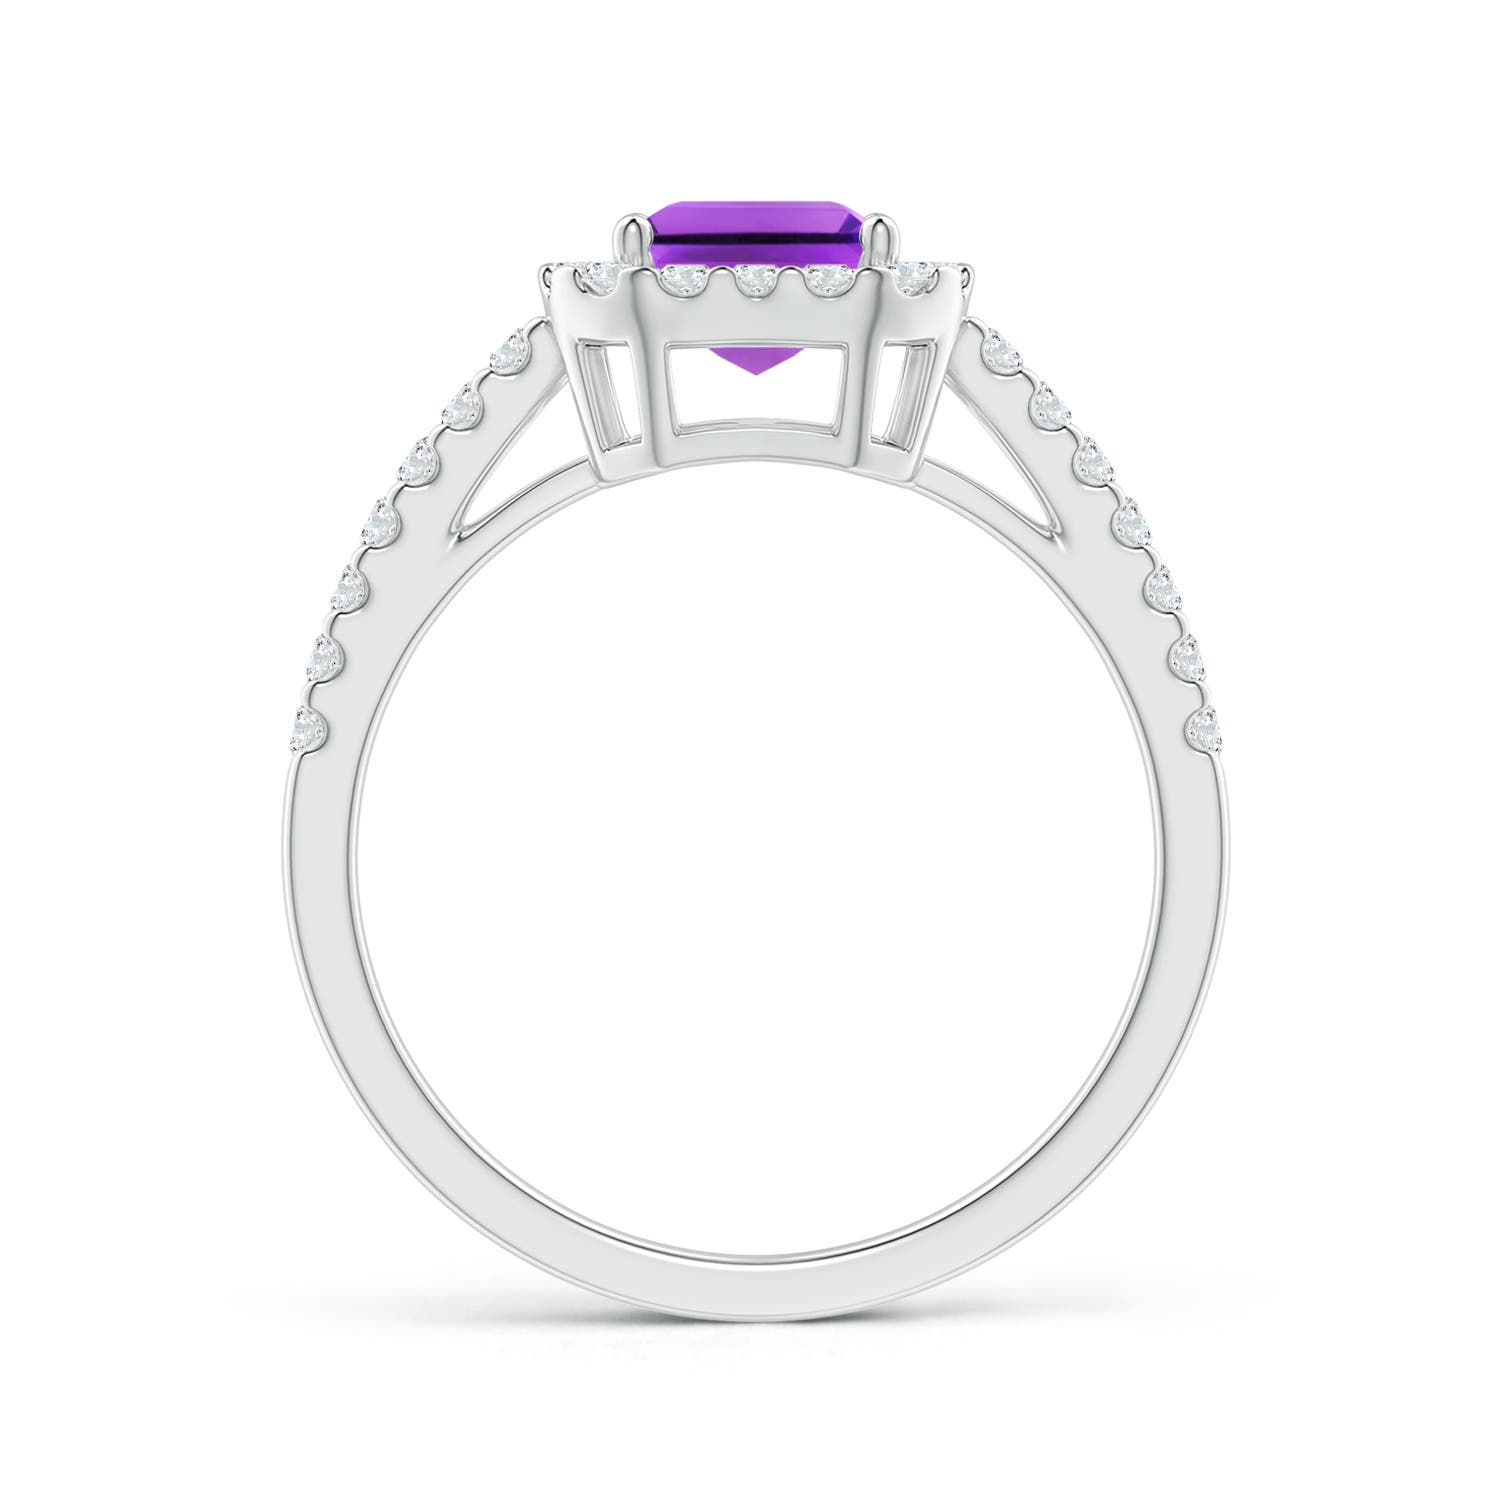 AAA - Amethyst / 1.91 CT / 14 KT White Gold